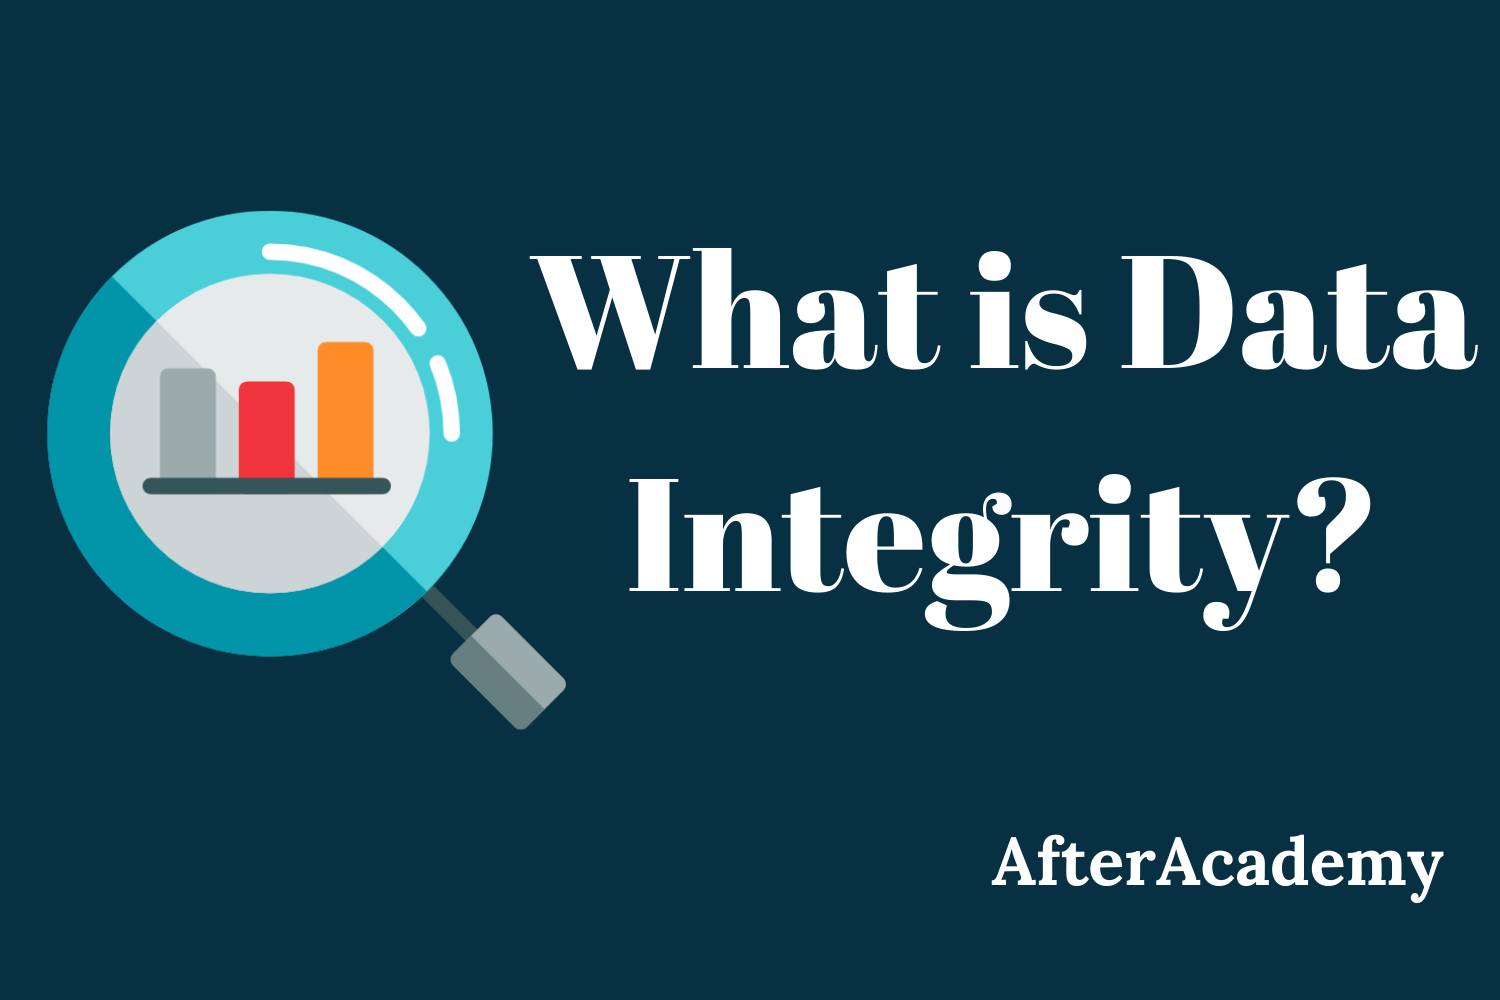 What is Data Integrity?